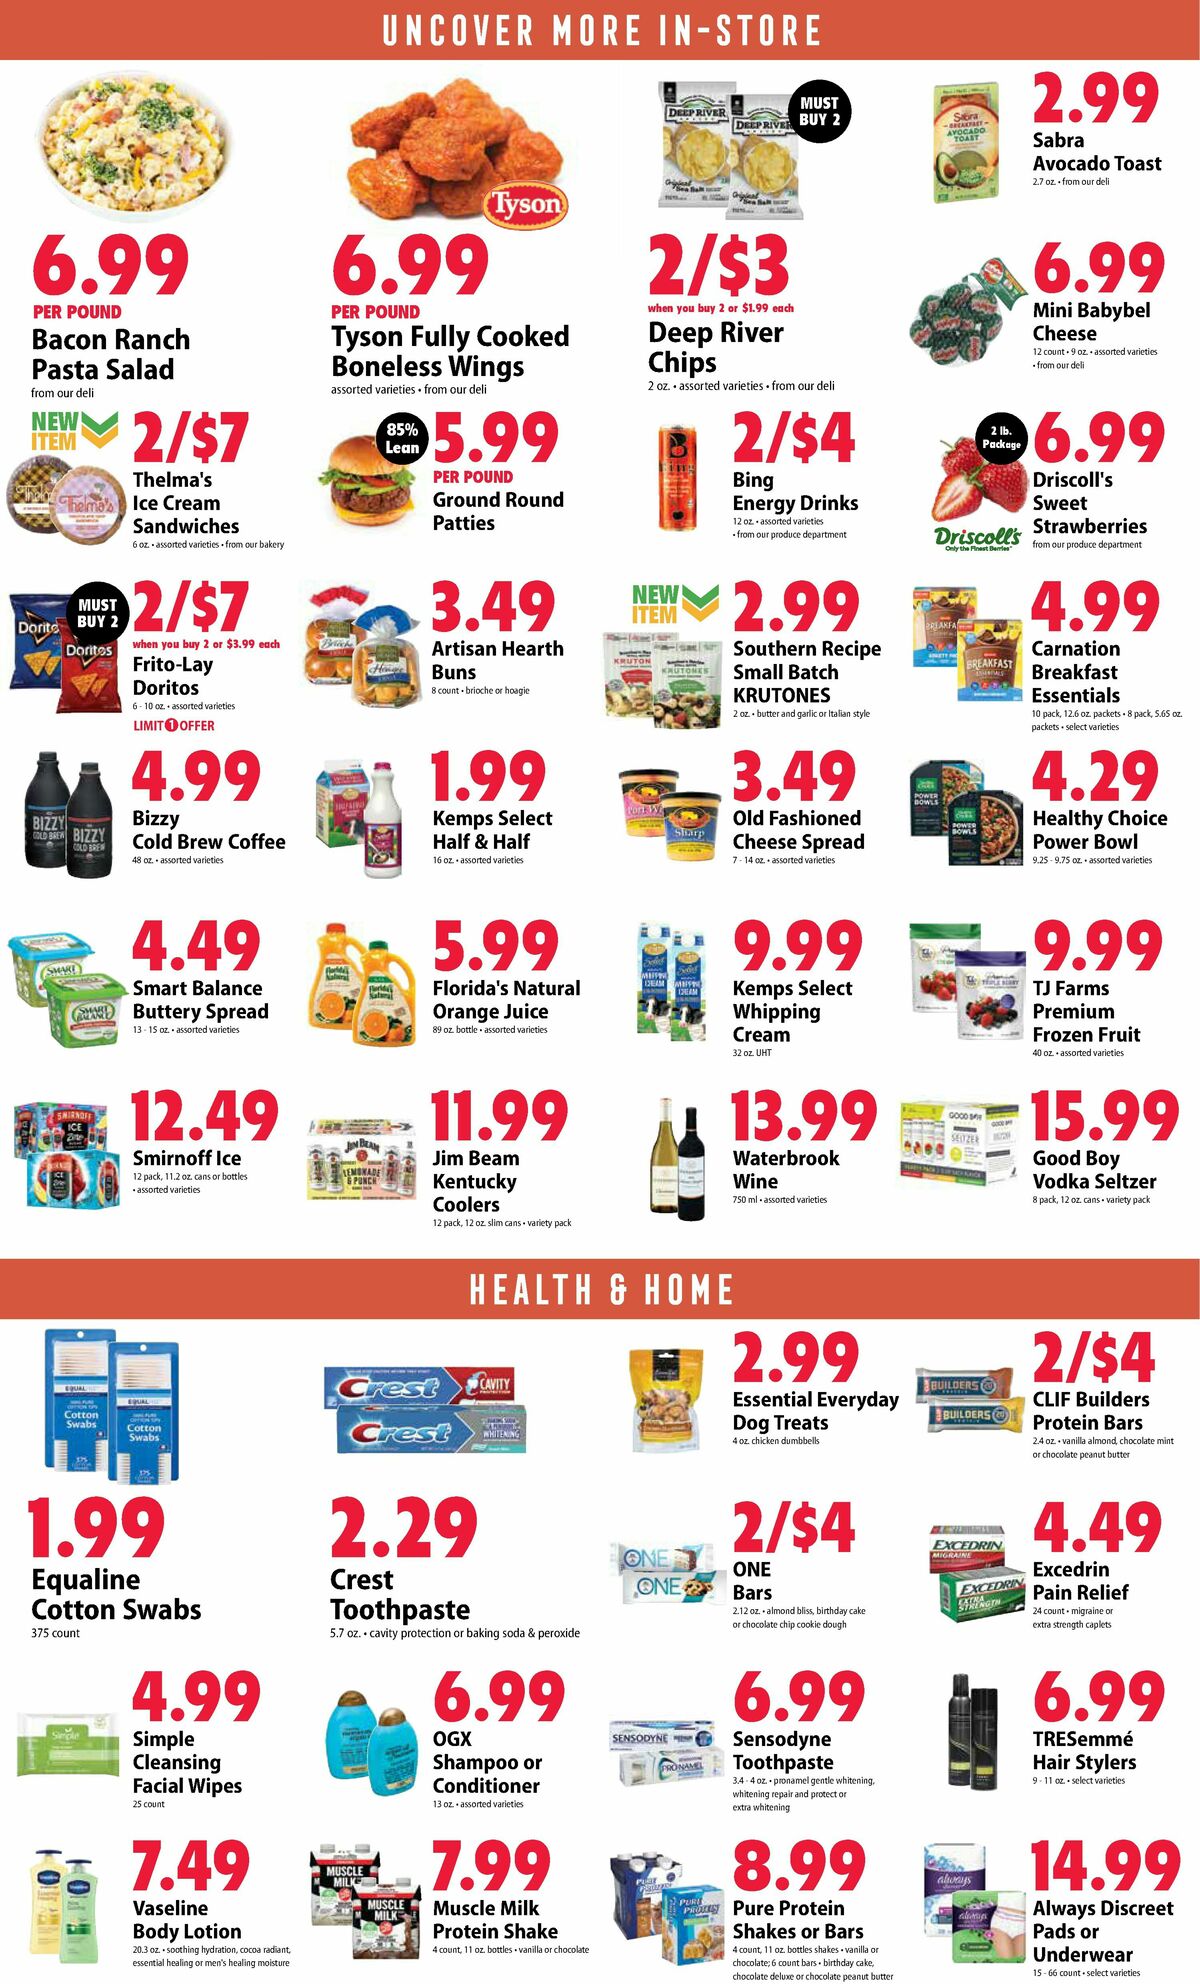 Festival Foods Weekly Ad from August 2